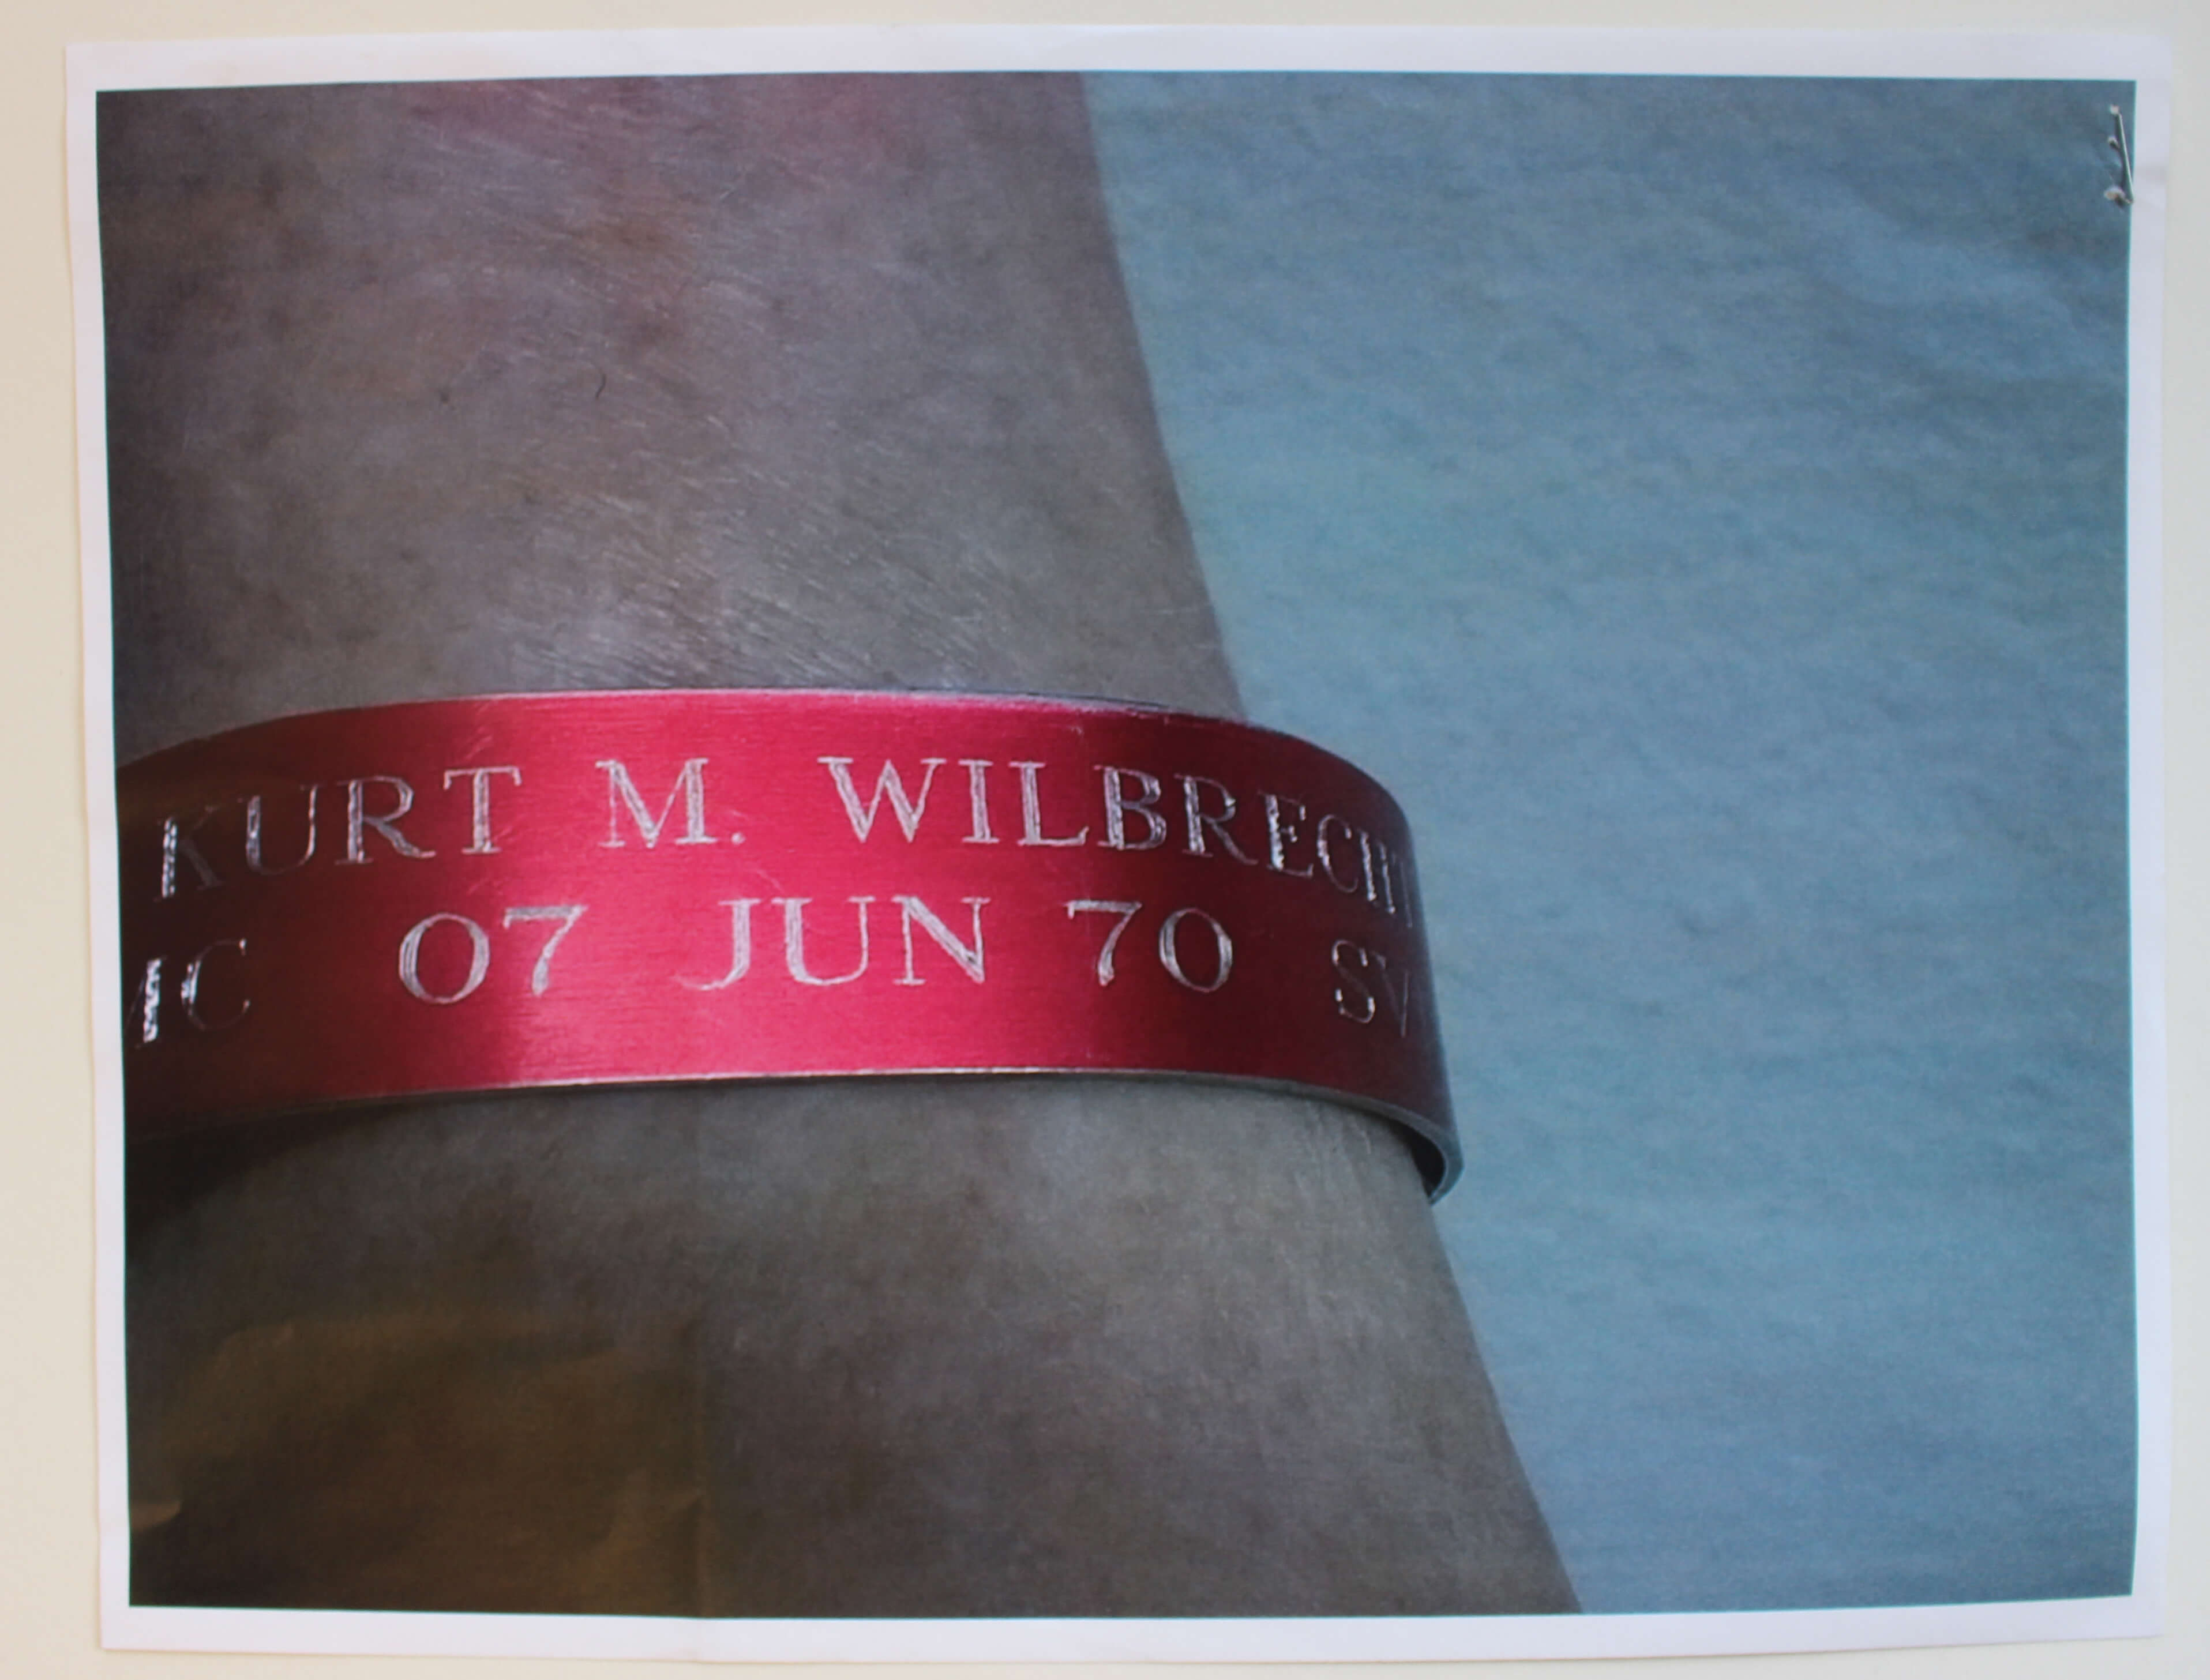 Red bracelet with the name Kurt M. Wilbrecht engraved in it